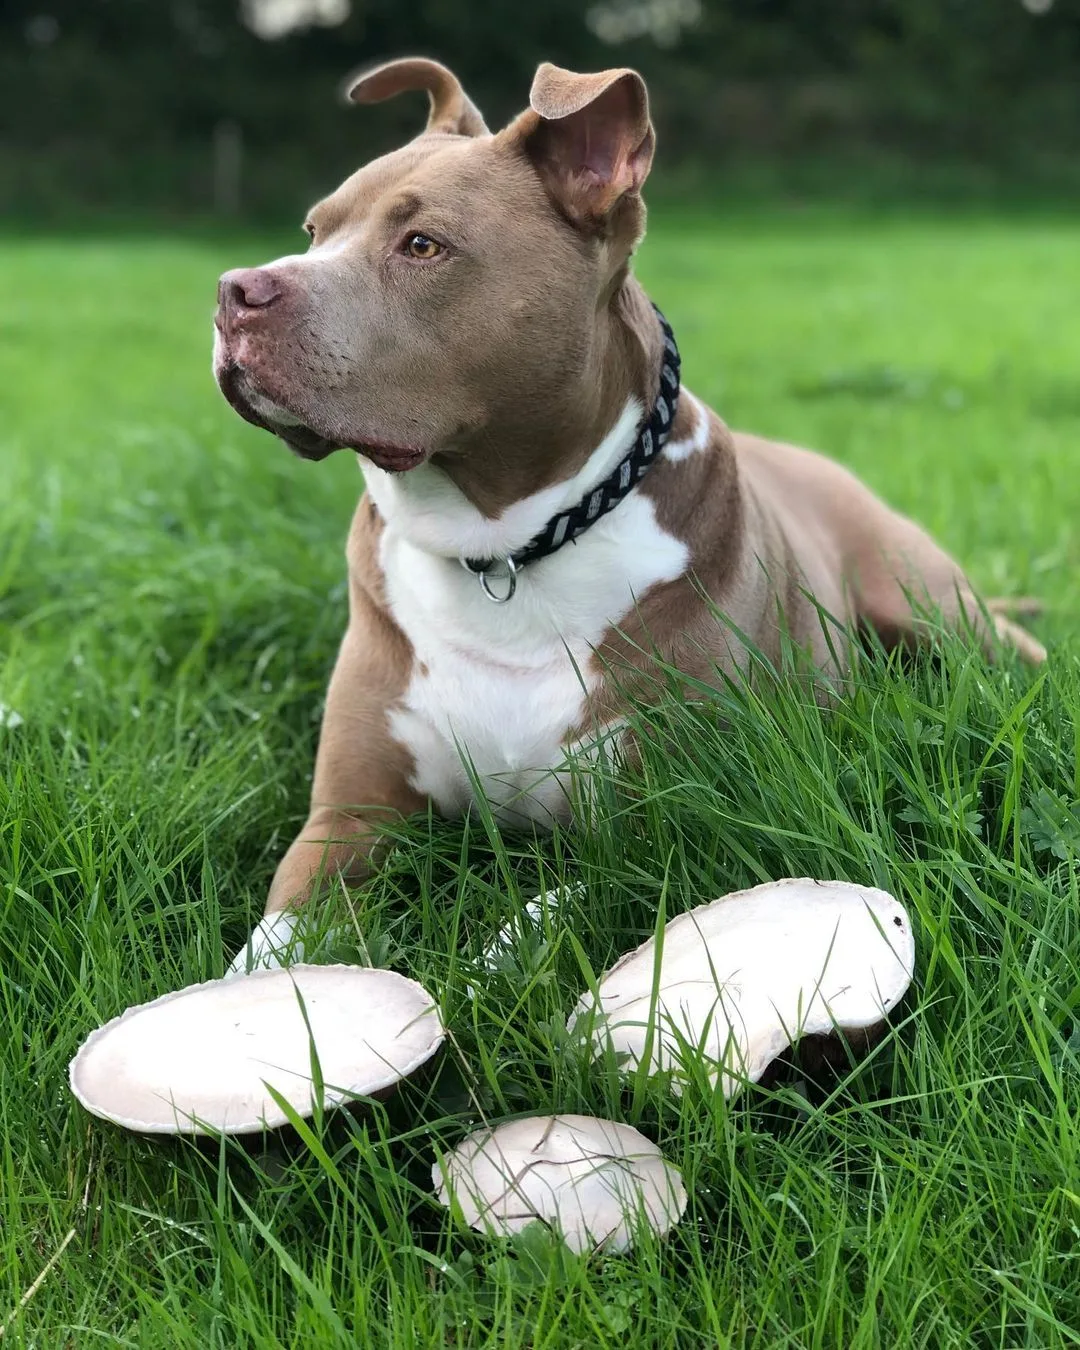 Pitbull Bully Mix is lying on the grass